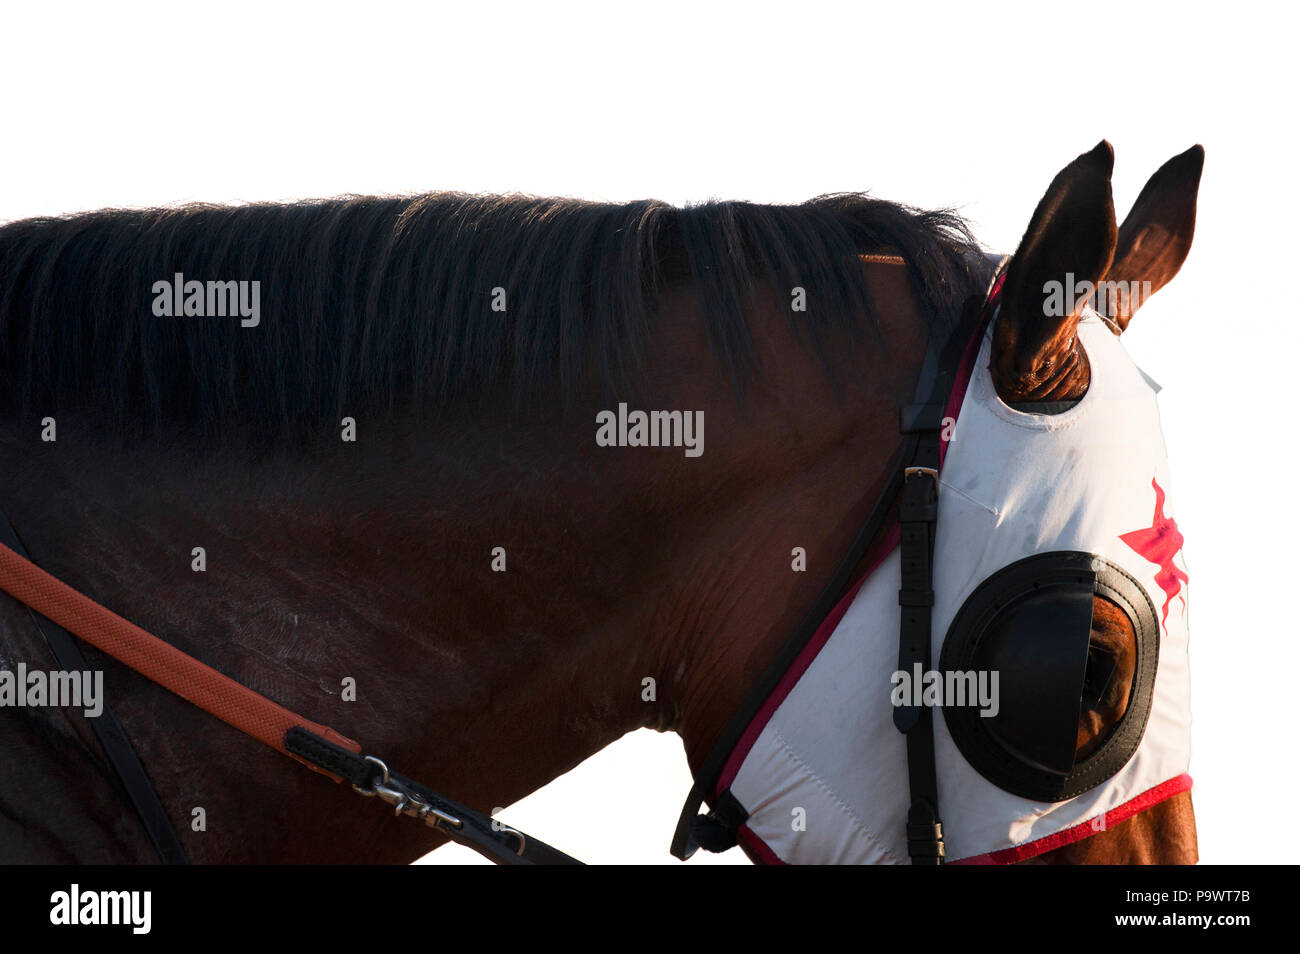 Profile of a racehorse's head with bridle and headpiece. Stock Photo